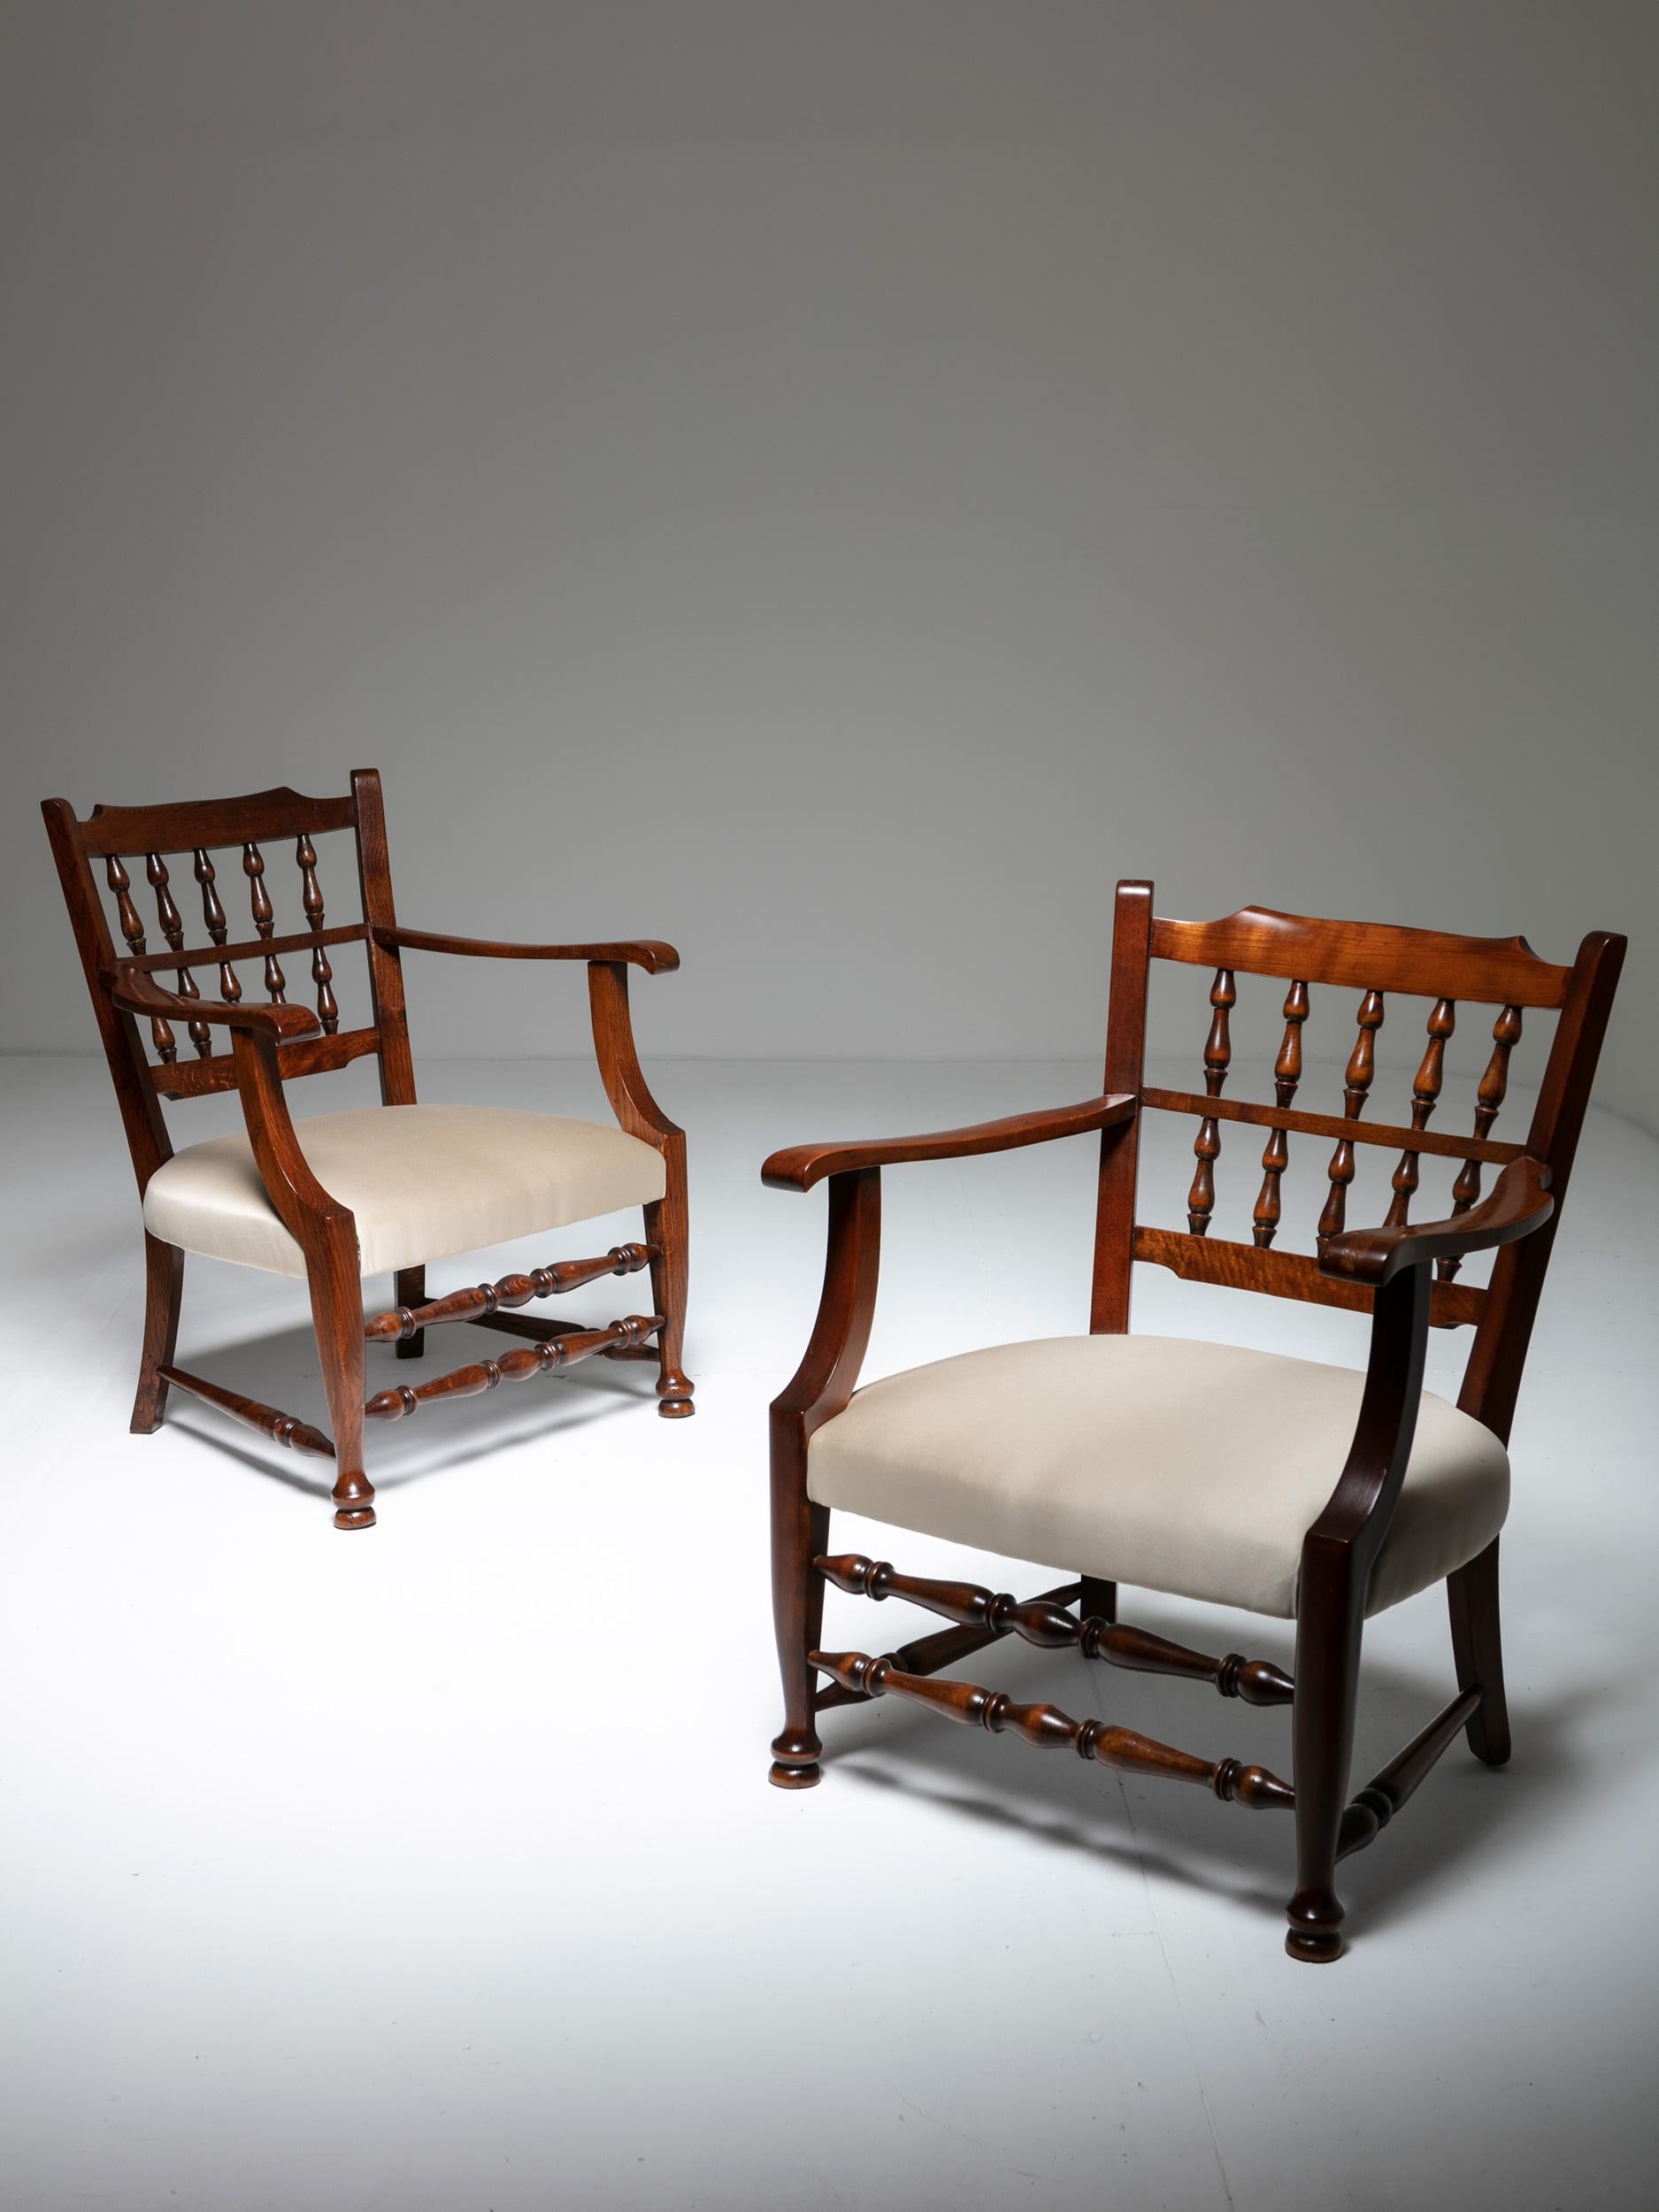 Italian Rare Set of Two Wood Armchairs by Tomaso Buzzi, Italy, 1930s For Sale